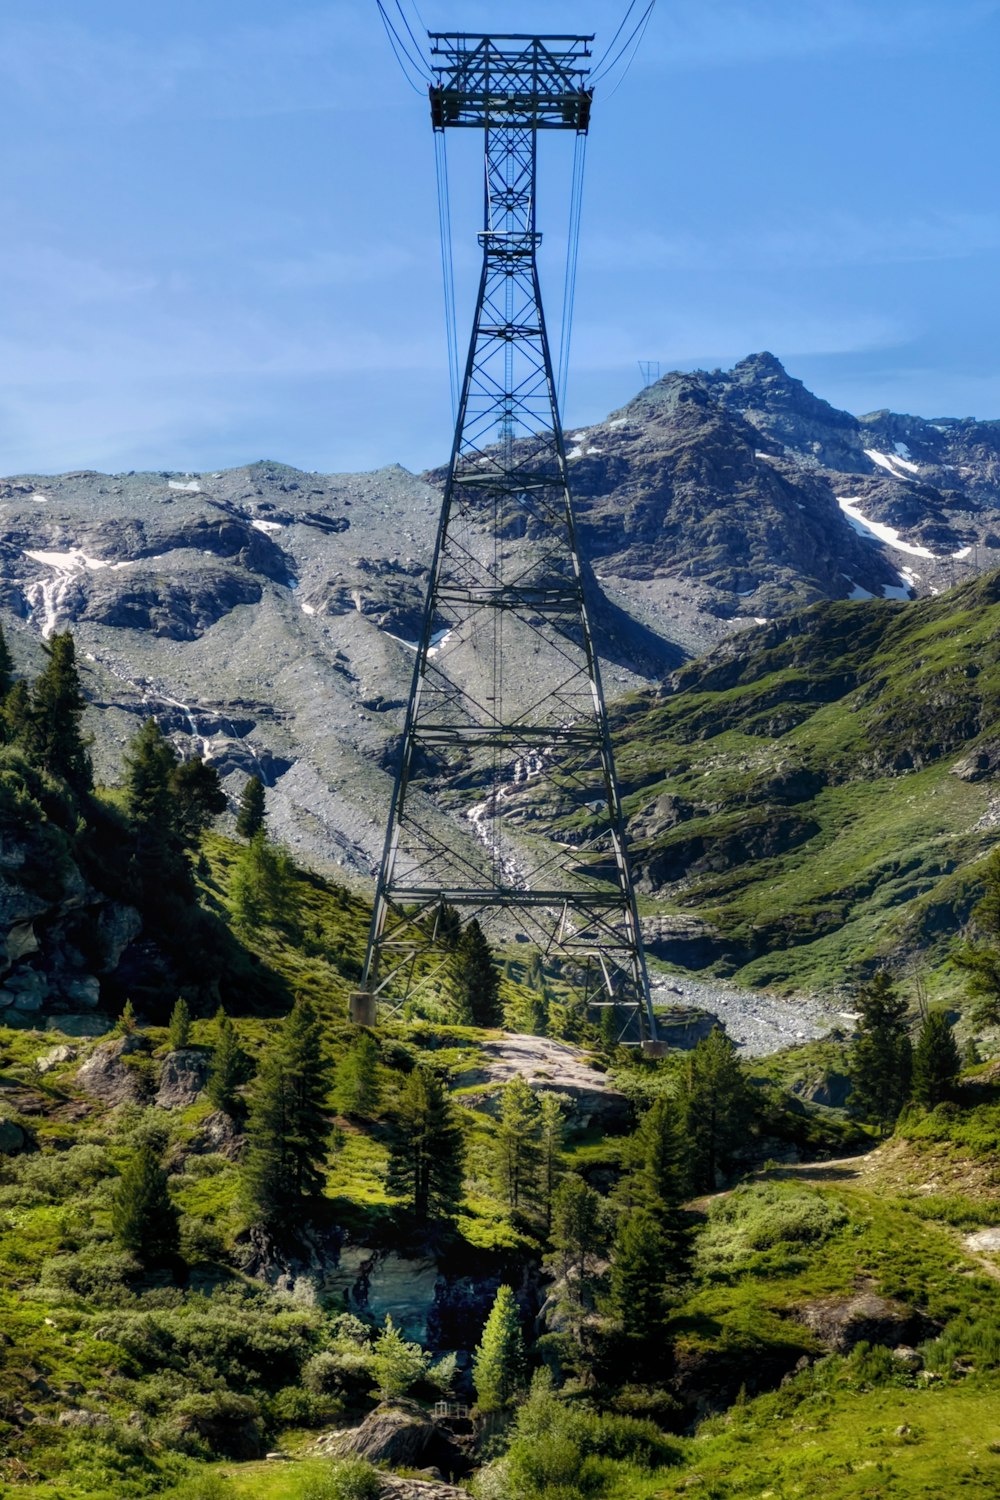 a view of a mountain range with a power line in the foreground